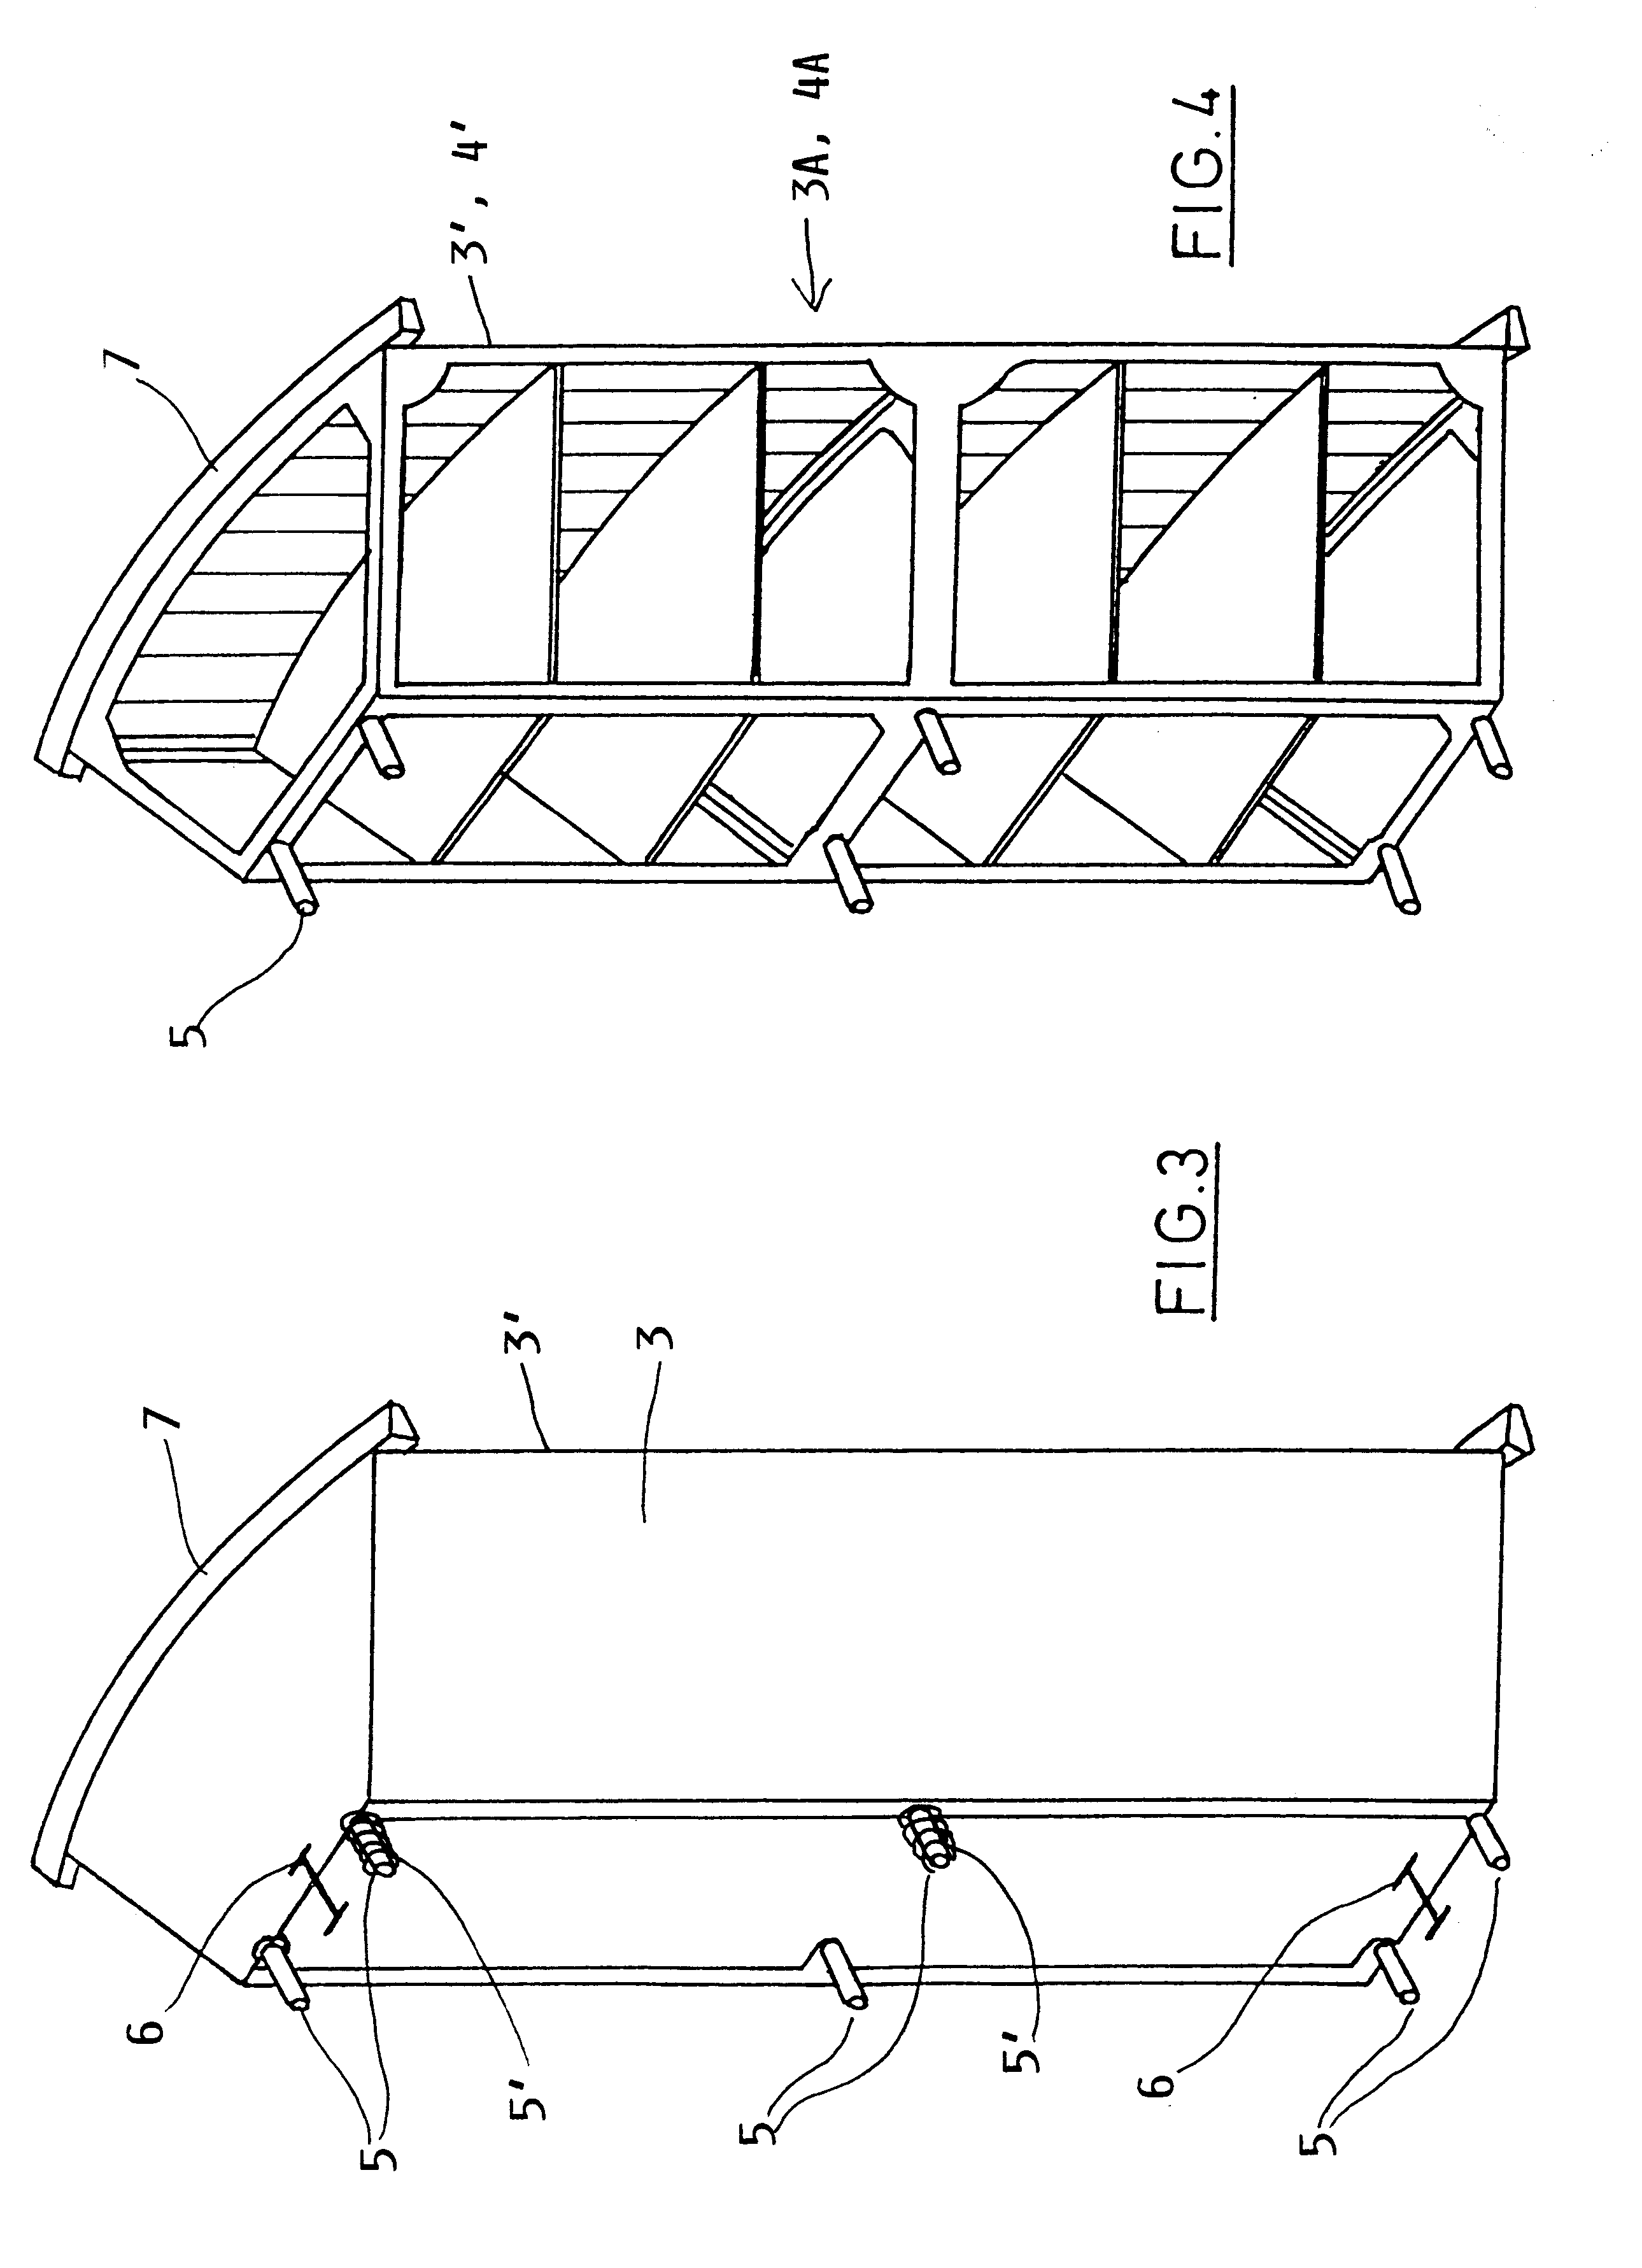 Apparatus for launching and deploying multiple satellites